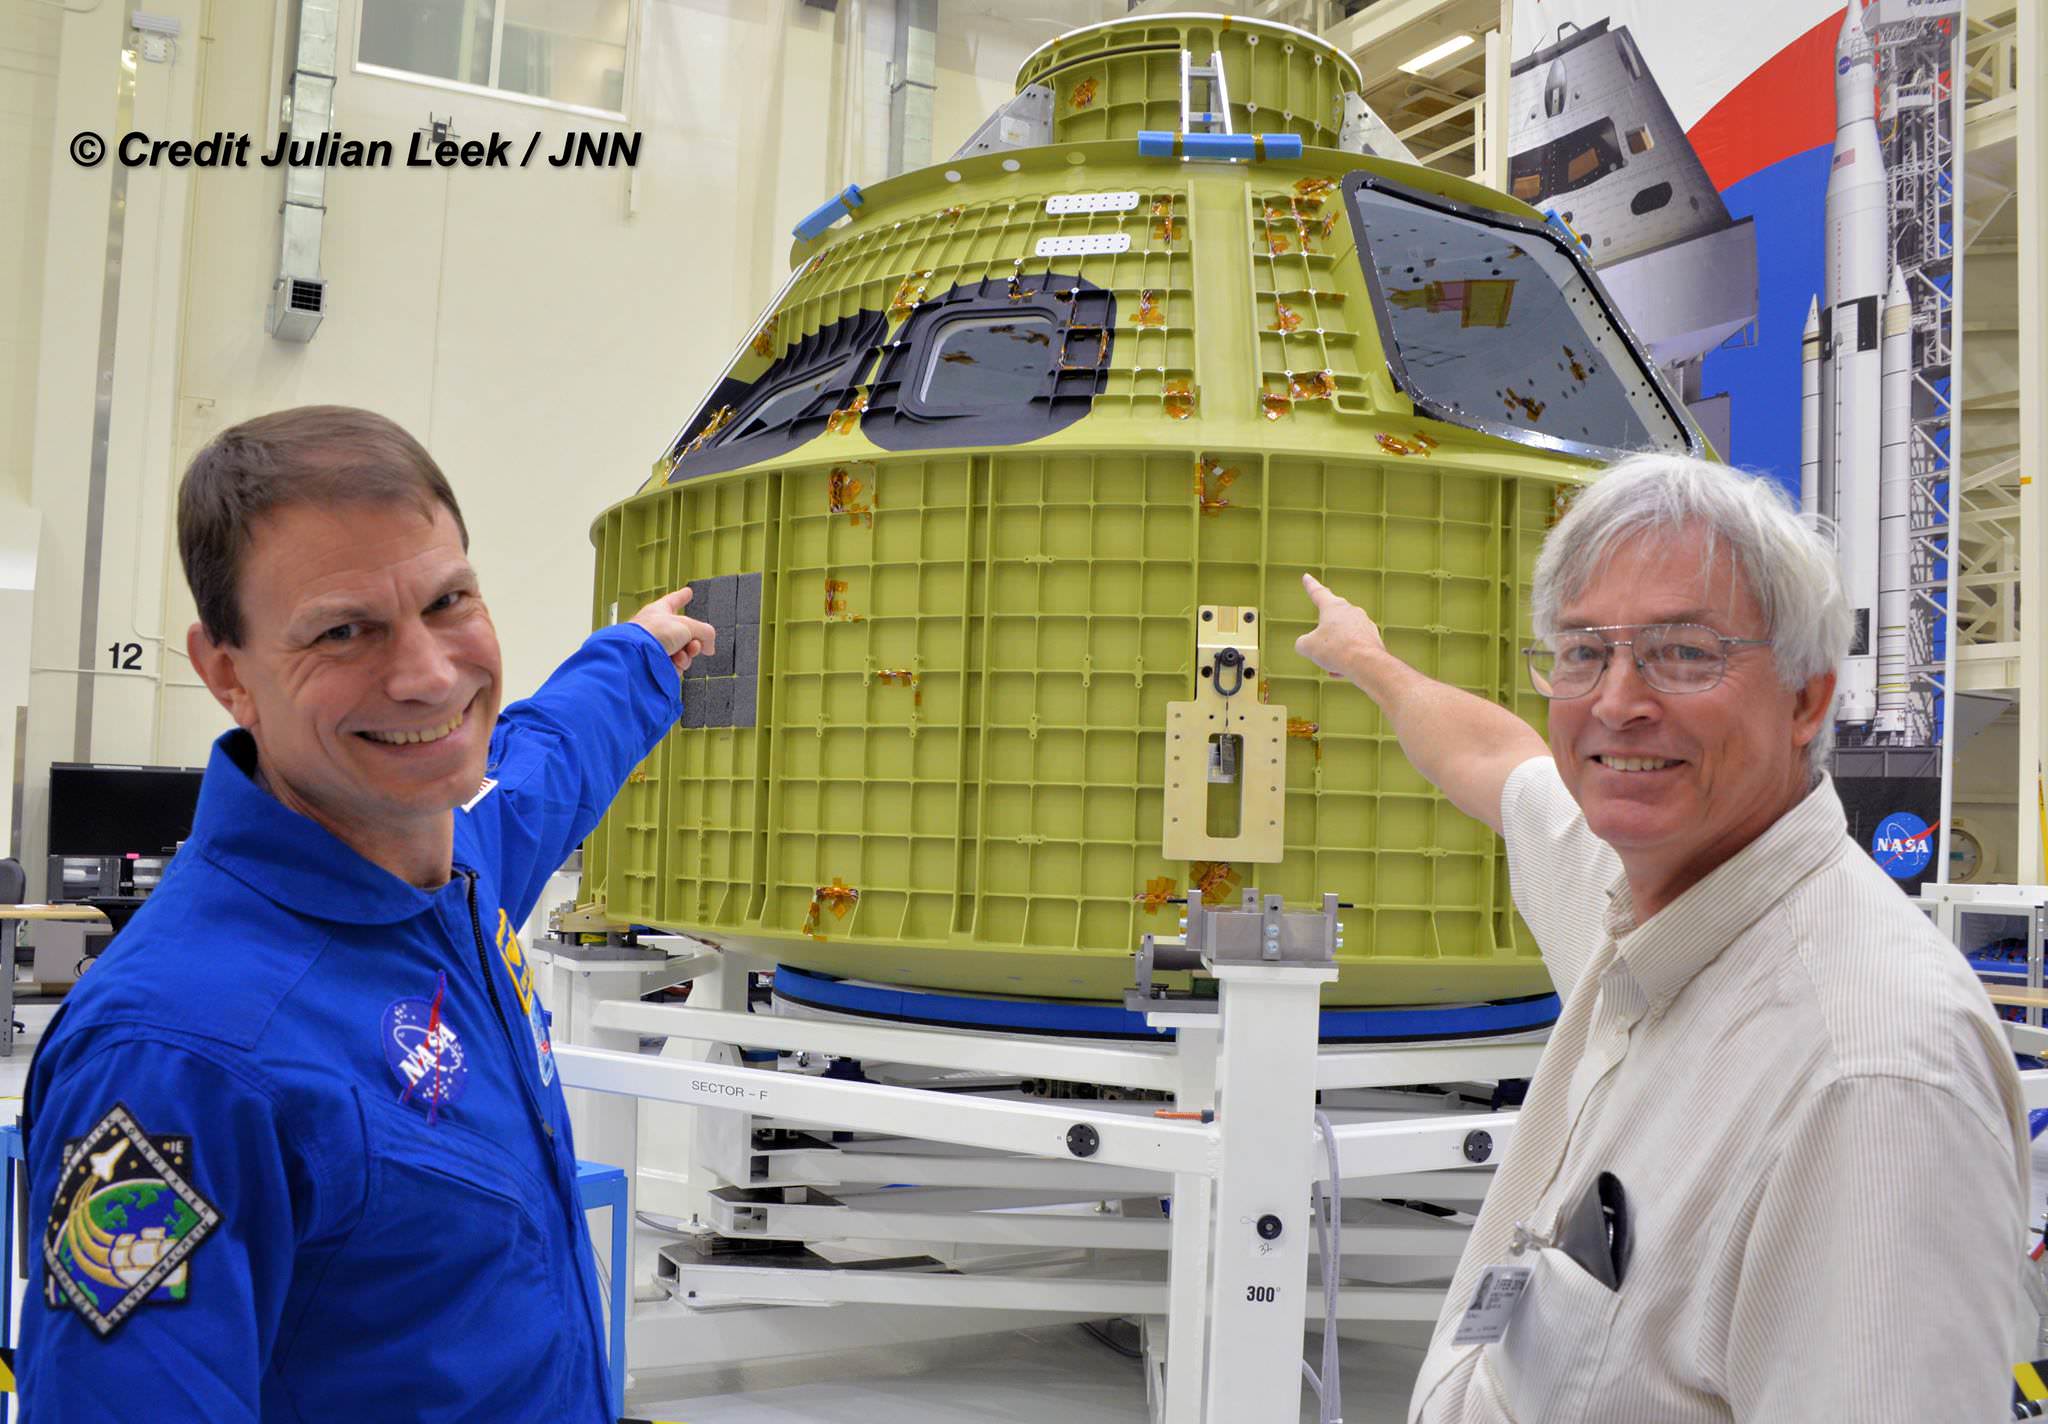 NASA astronaut Stan Love and Universe Today’s Ken Kremer point the way to the Orion EM-1 pressure vessel and its future flight to the Moon in 2018. The newly arrived Orion is being outfitted with all of its flight systems inside the Neil Armstrong Operations and Checkout Building high bay at NASA's Kennedy Space Center in Florida.  Credit: Julian Leek